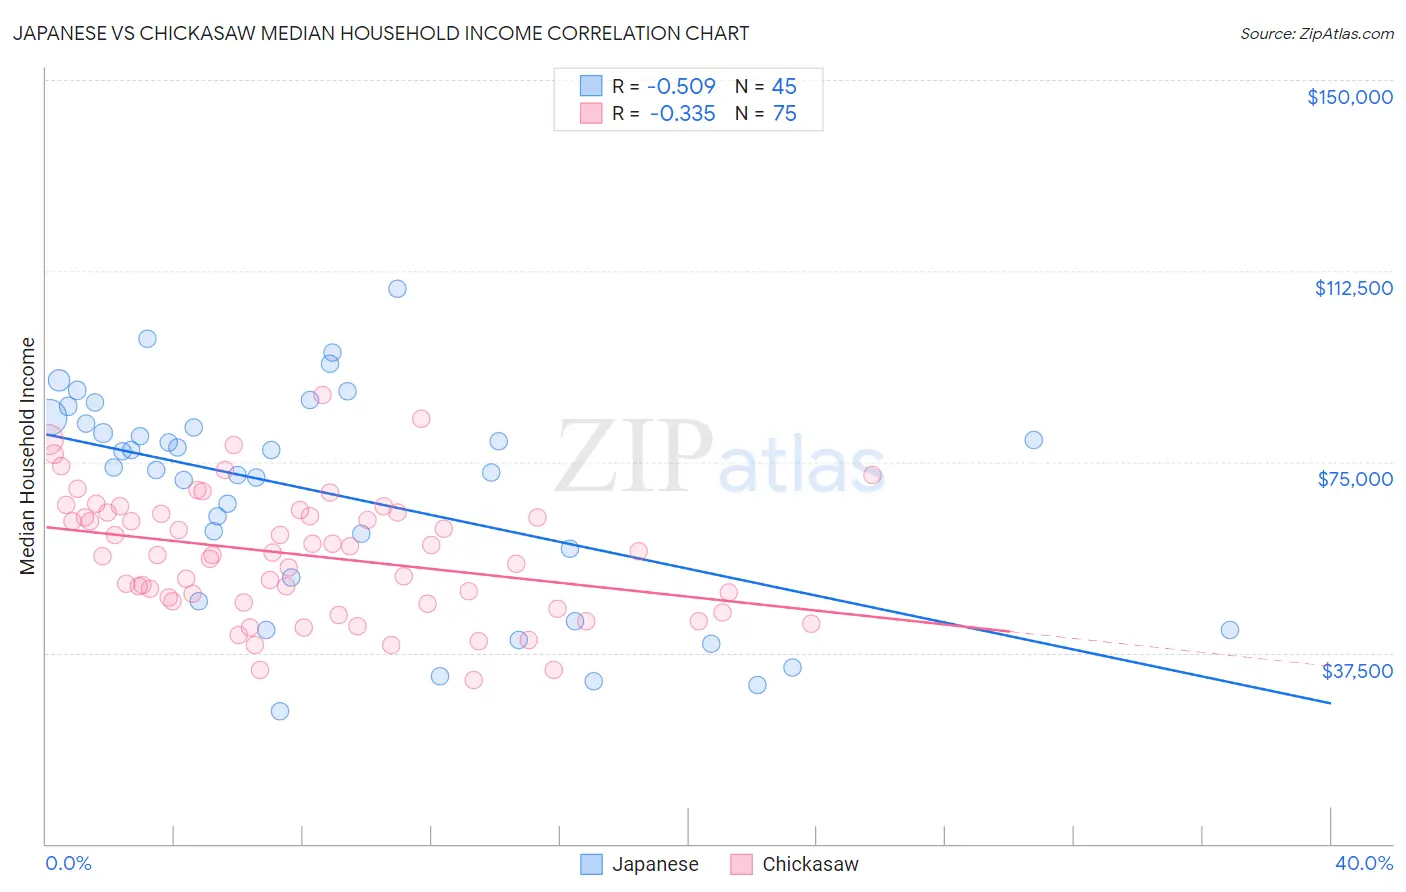 Japanese vs Chickasaw Median Household Income